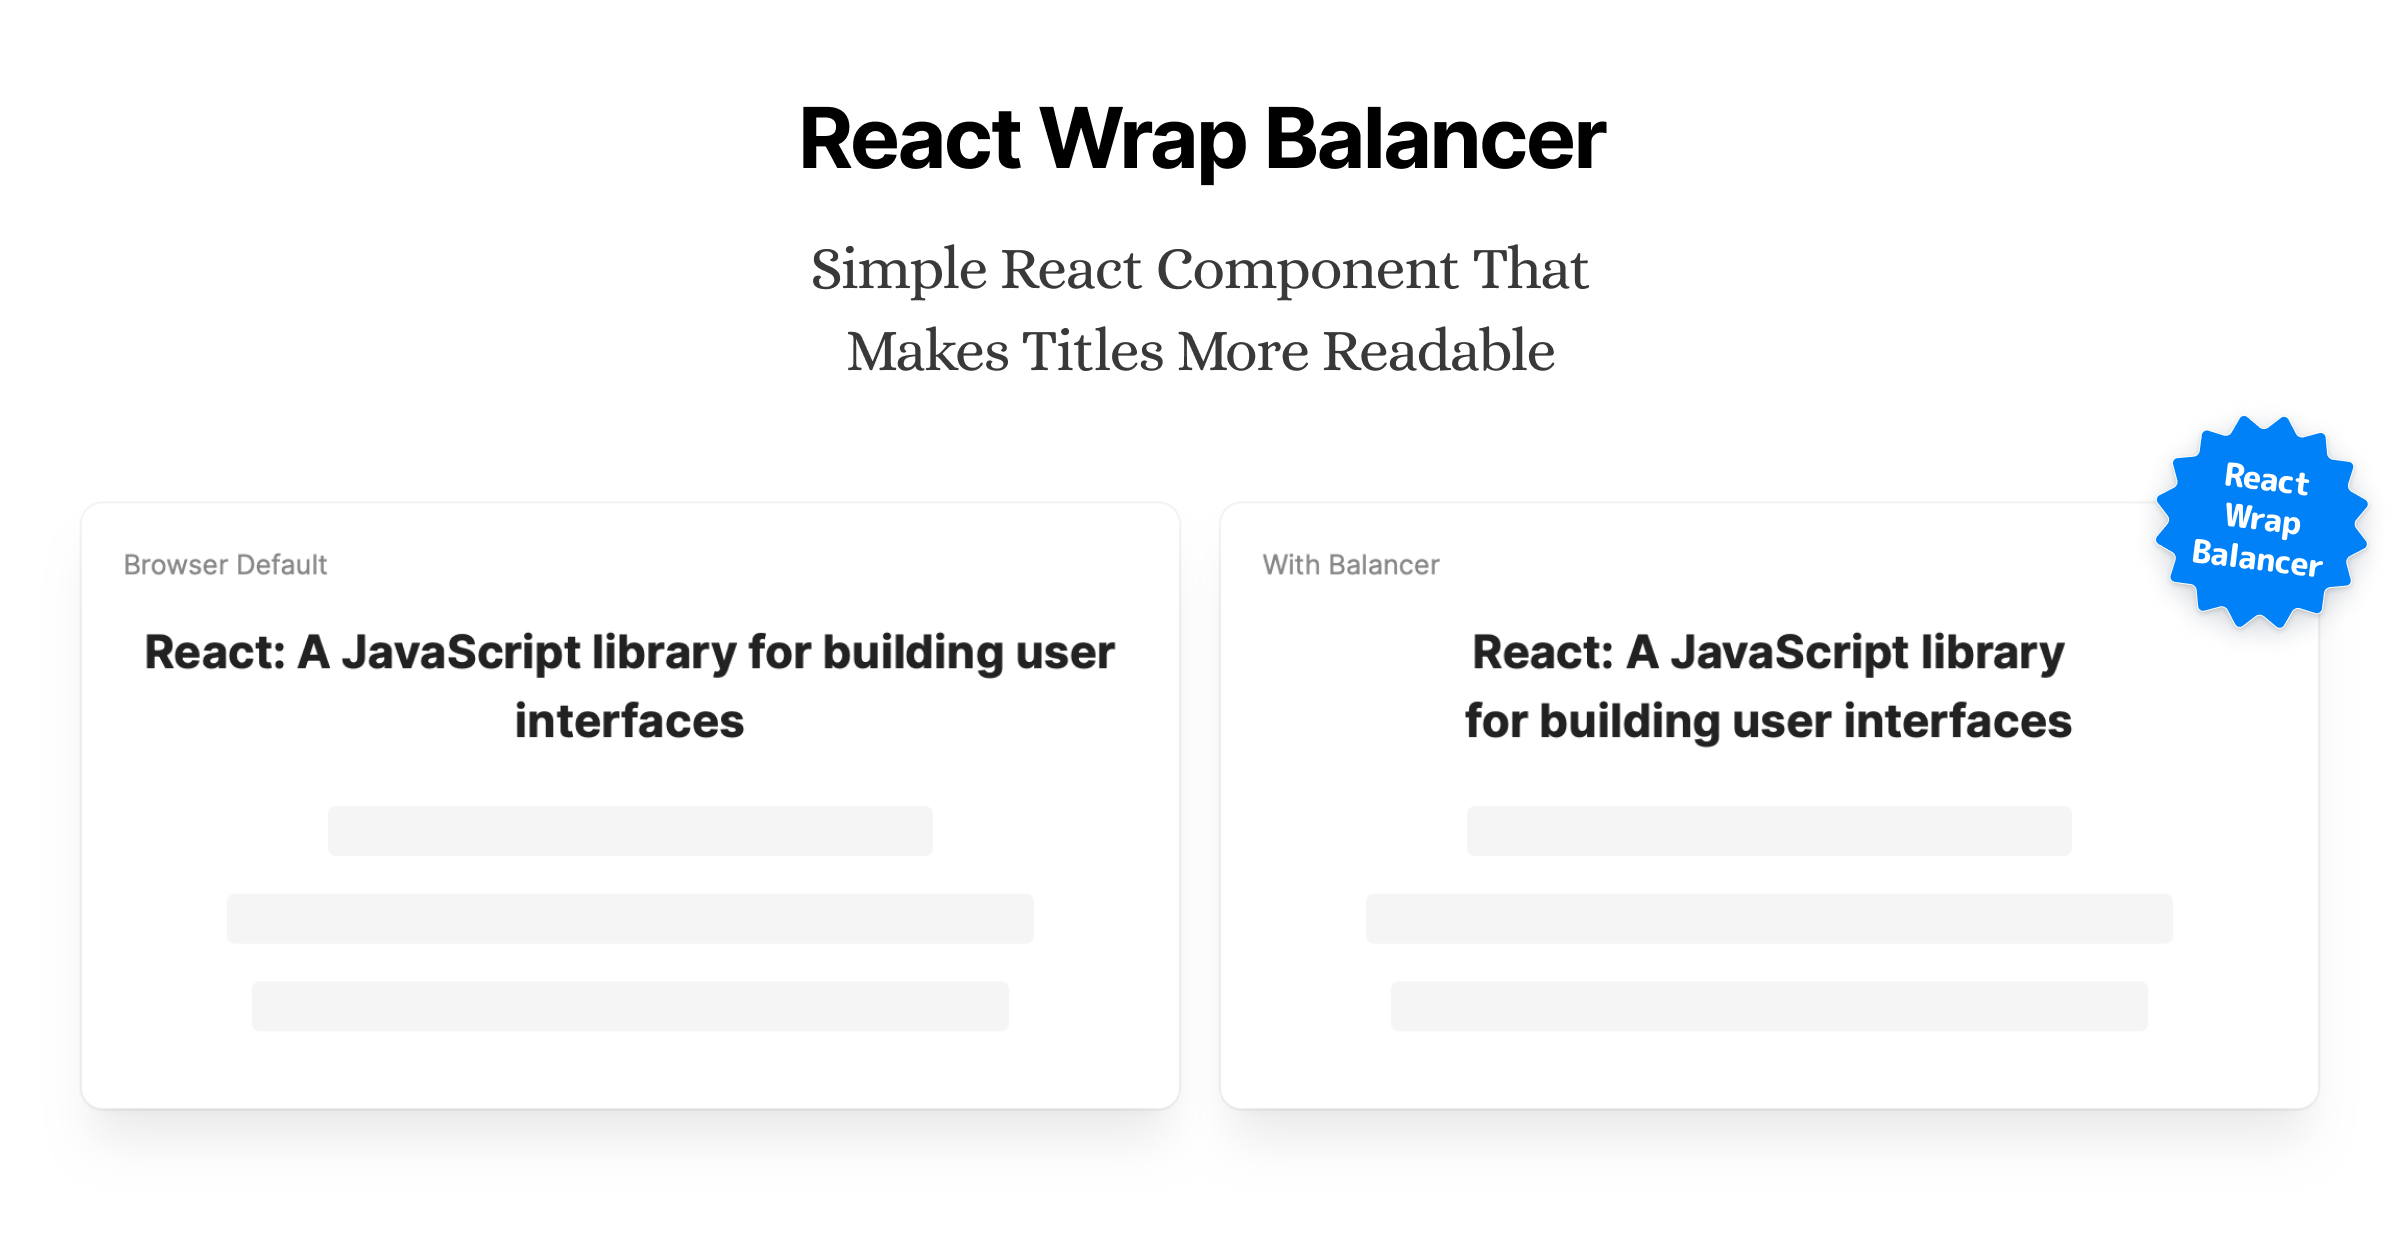 React Wrap Balancer - Simple React Component That Makes Titles More Readable